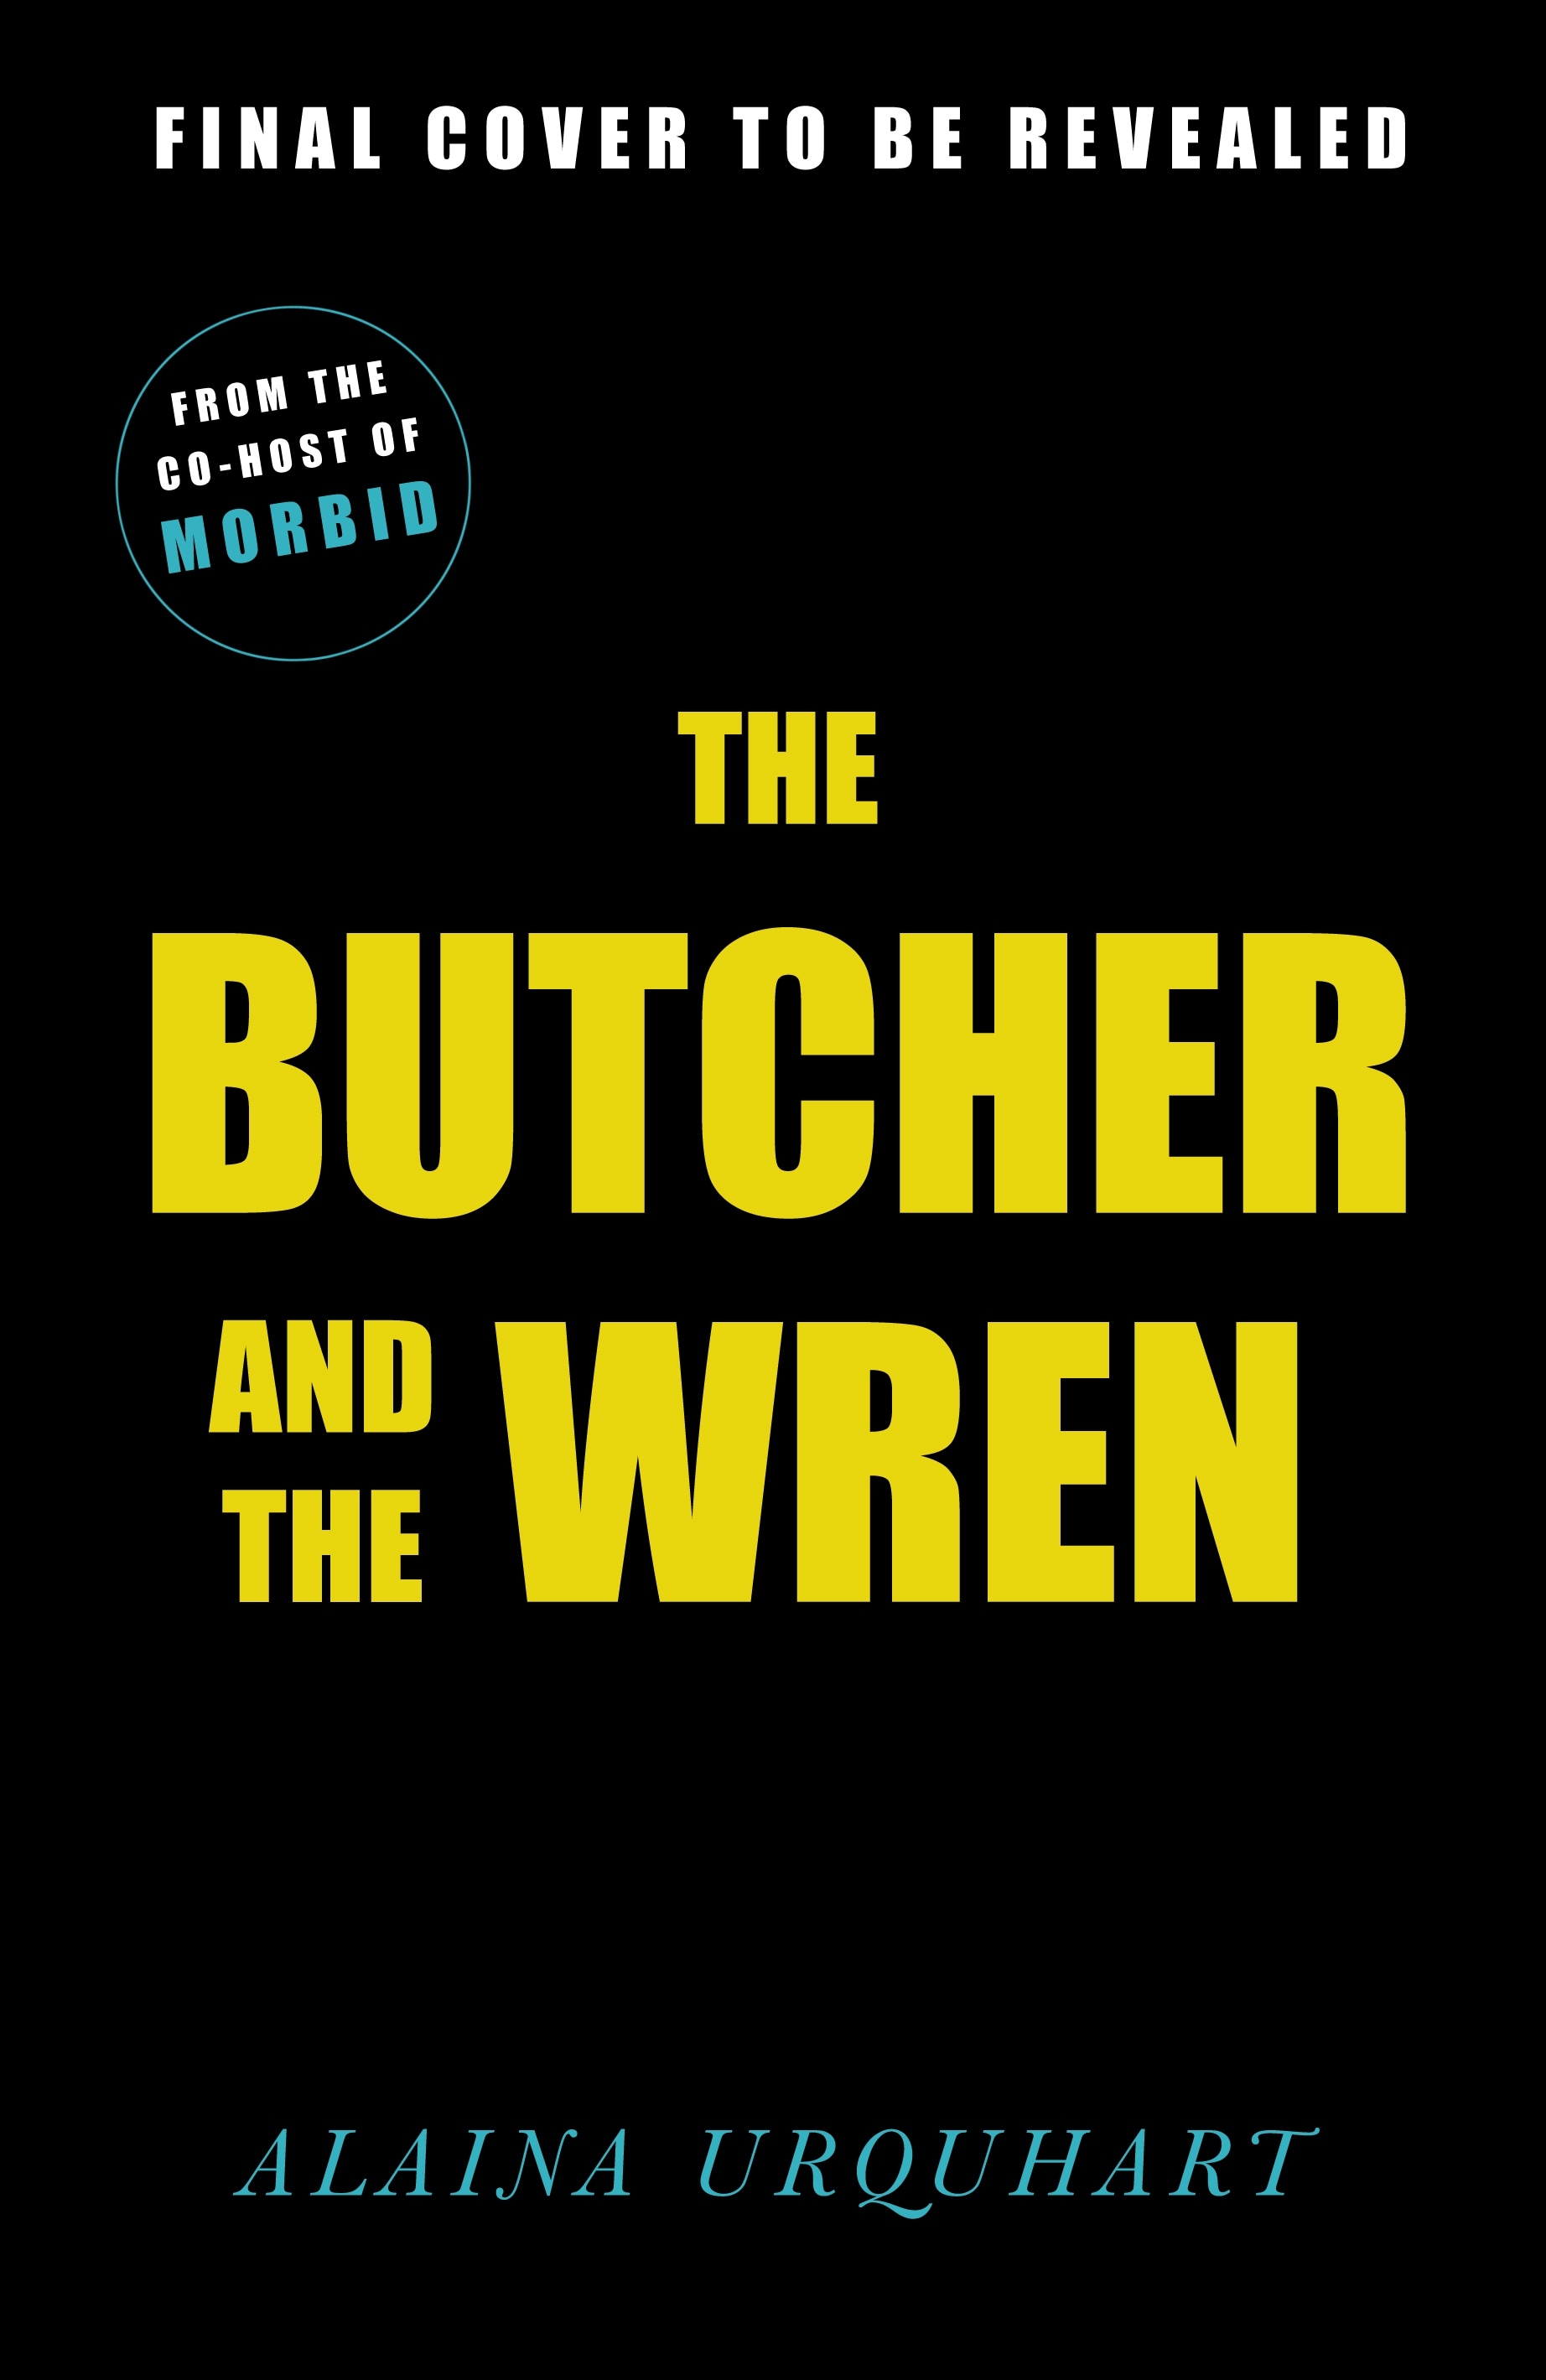 Book “The Butcher and the Wren” by Alaina Urquhart — September 13, 2022